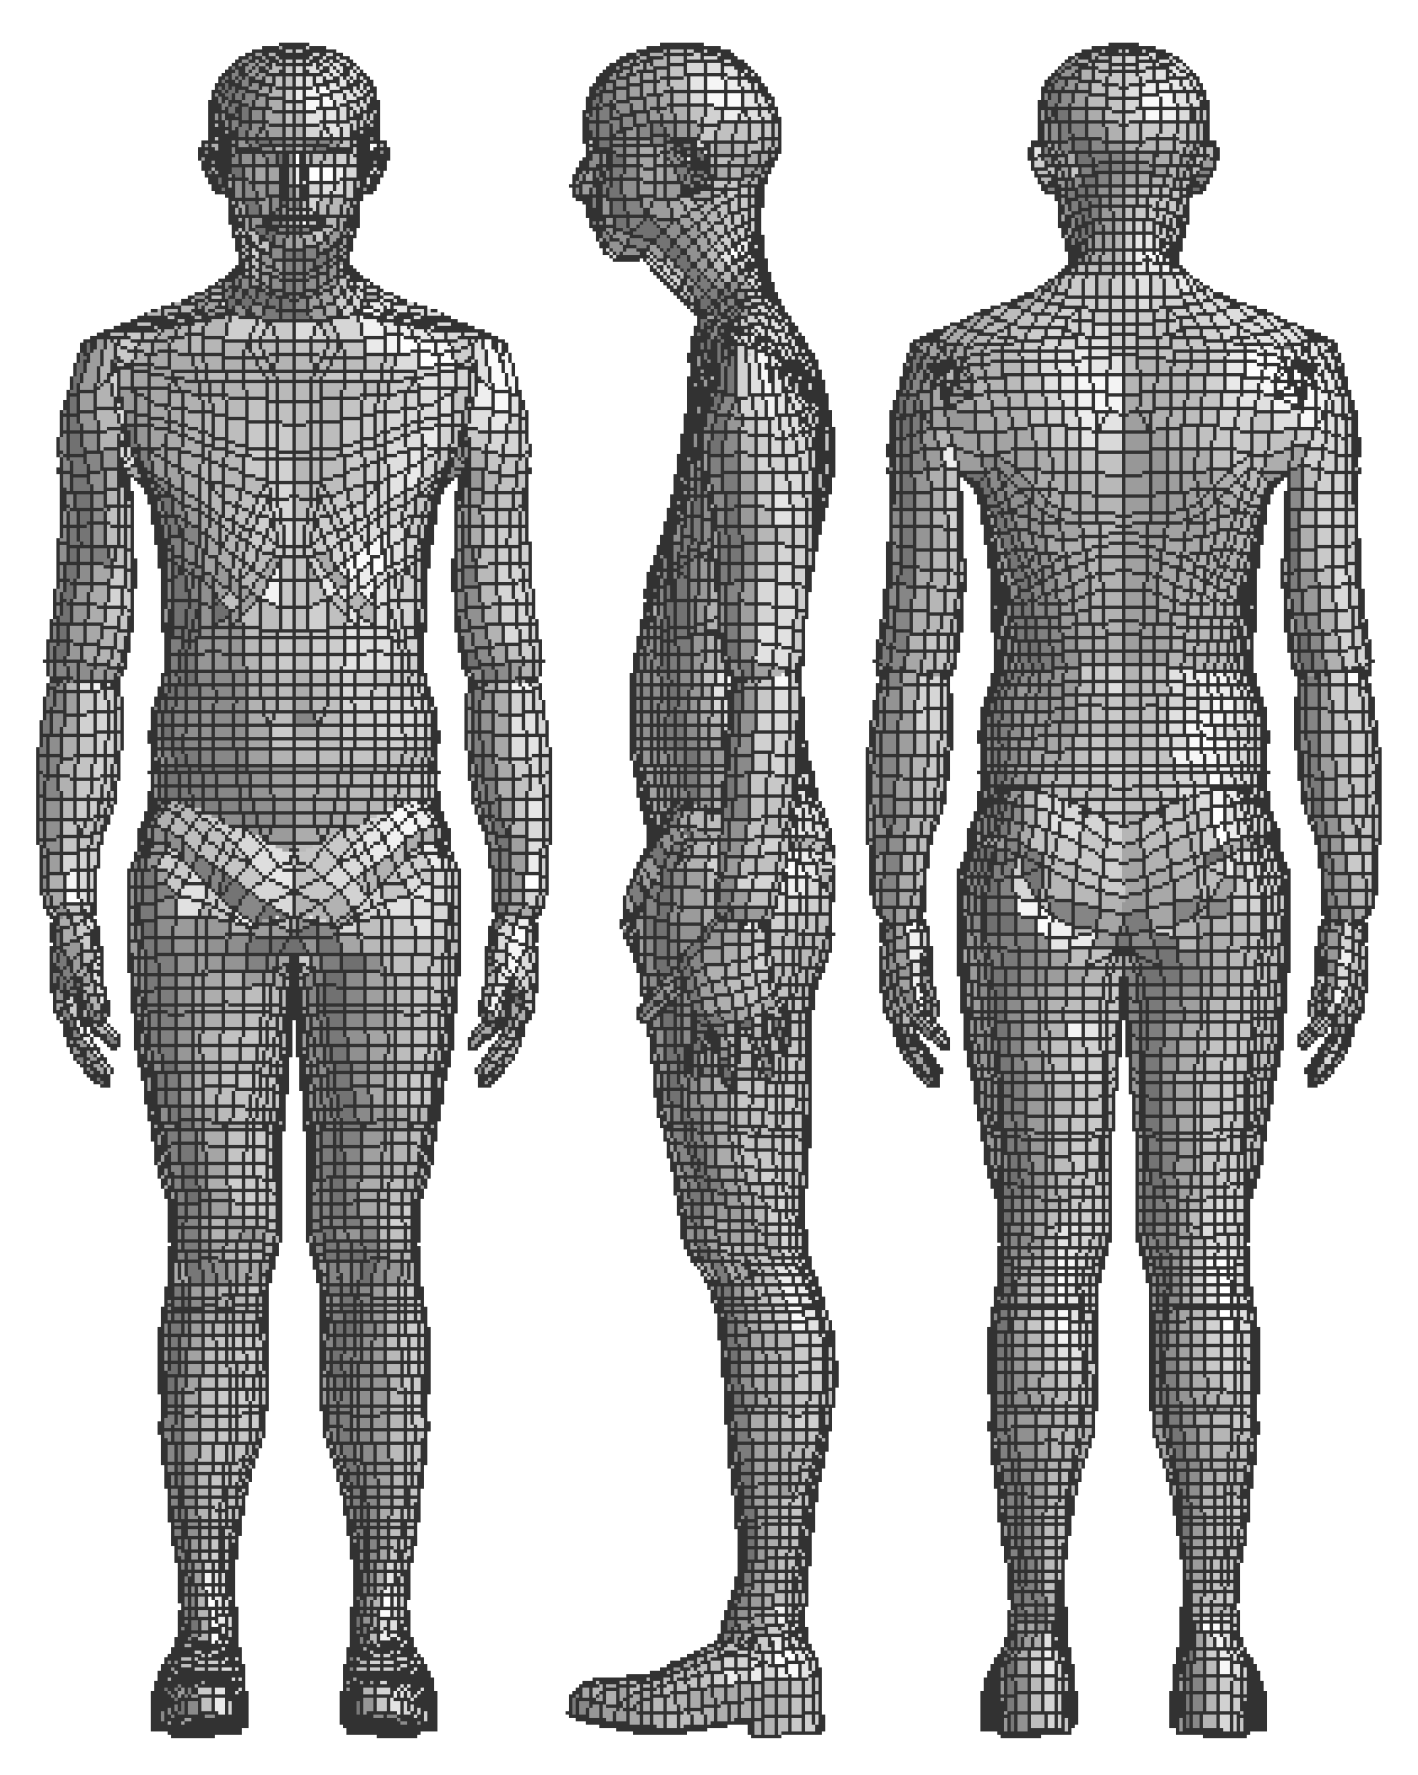 Applied Sciences | Free Full-Text | Personalization of a Human Body Model  Using Subject-Specific Dimensions for Designing Clothing Patterns